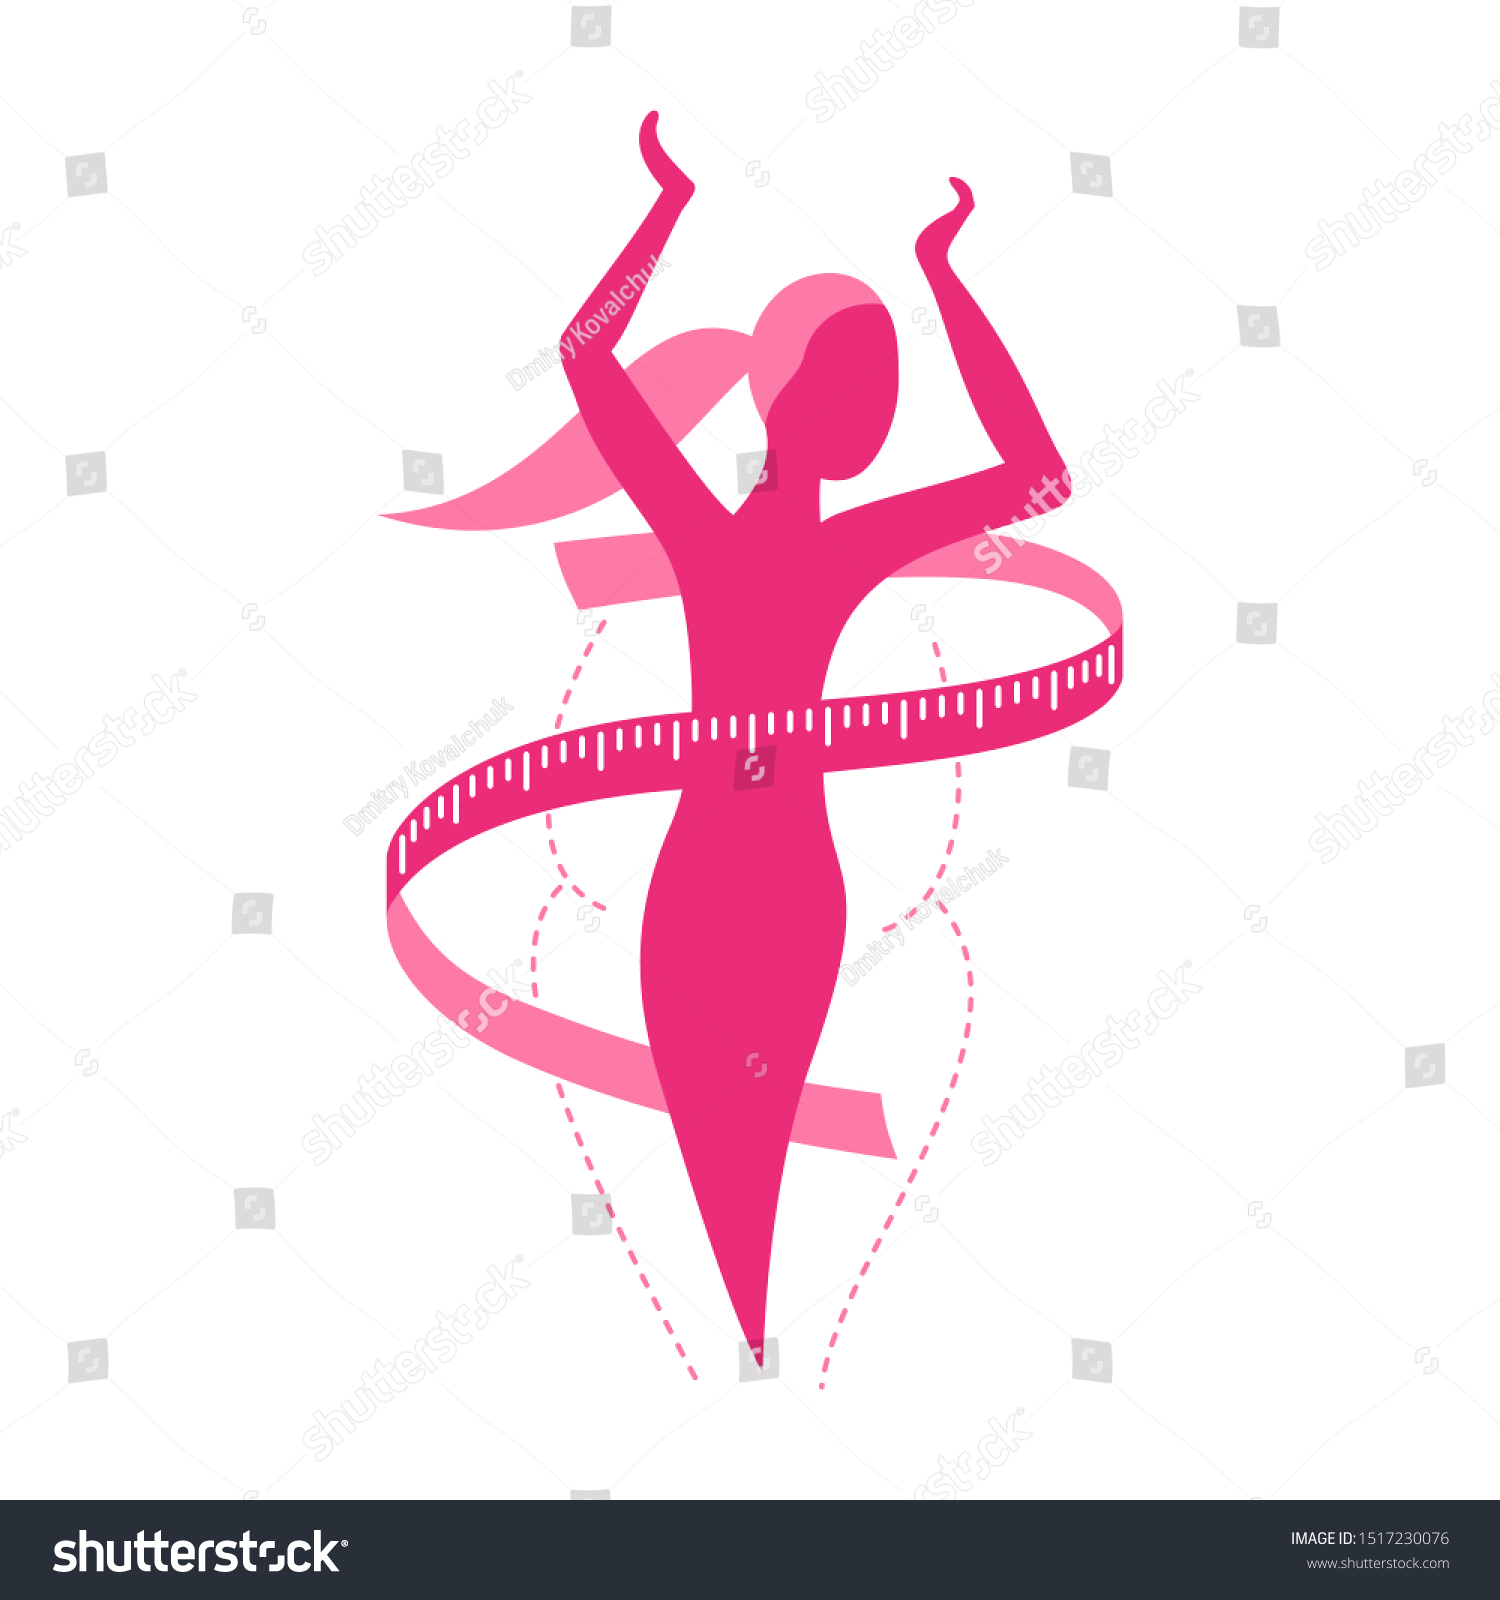 SVG of Weight loss challenge diet program logo (isolated icon) - abstract woman silhouette (fat and shapely figure) with measuring tape around  svg